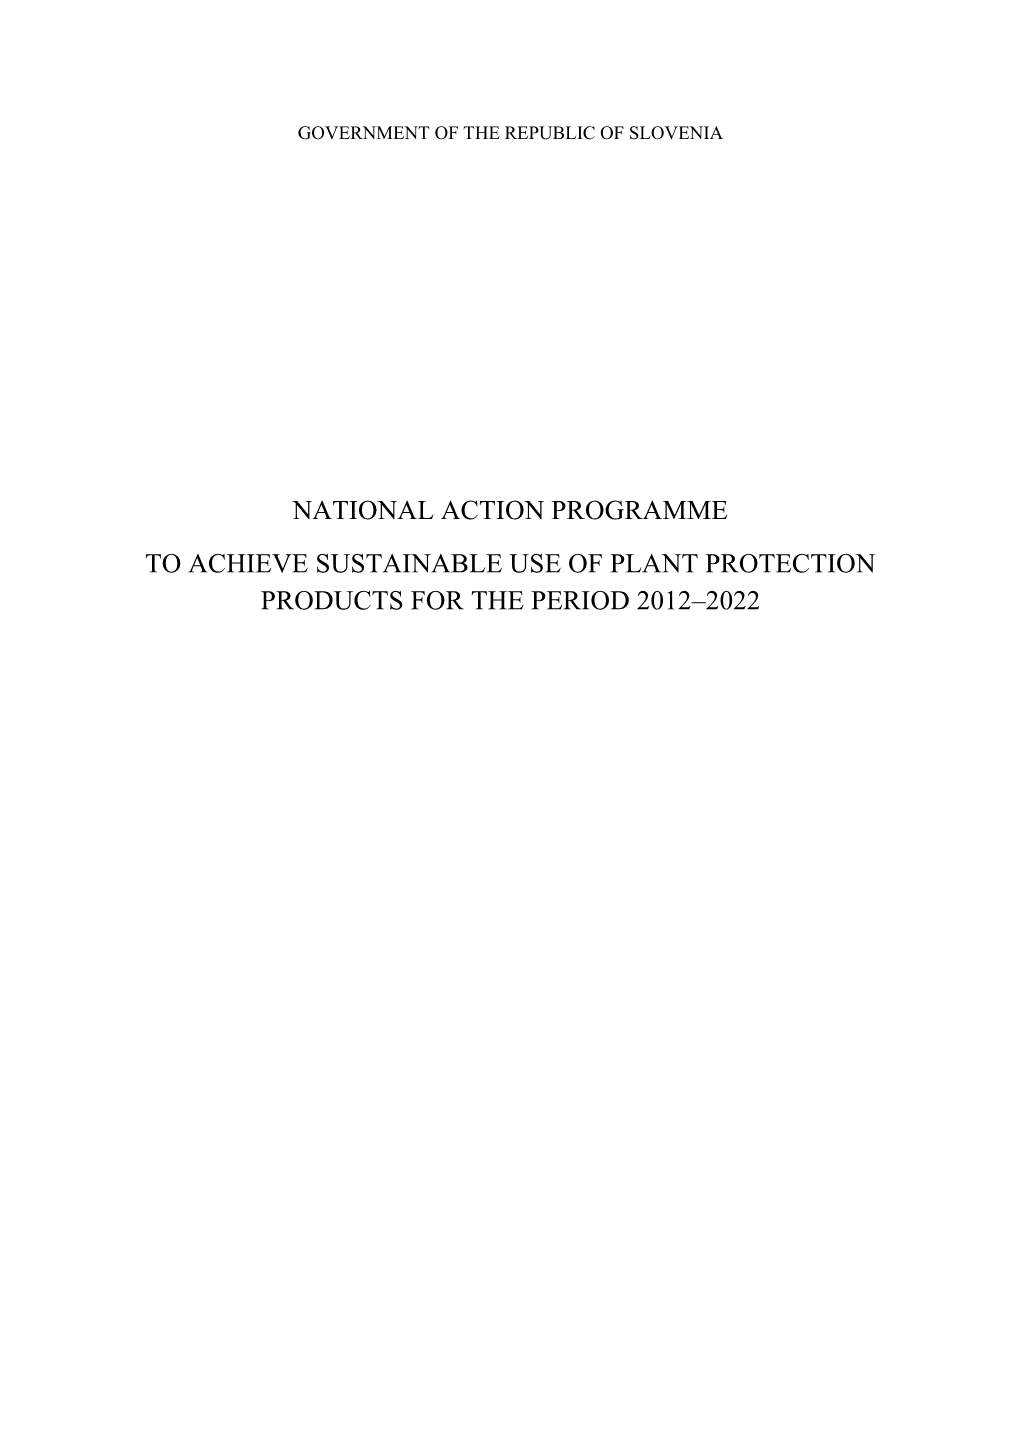 National Action Programme to Achieve Sustainable Use of Plant Protection Products for the Period 2012–2022